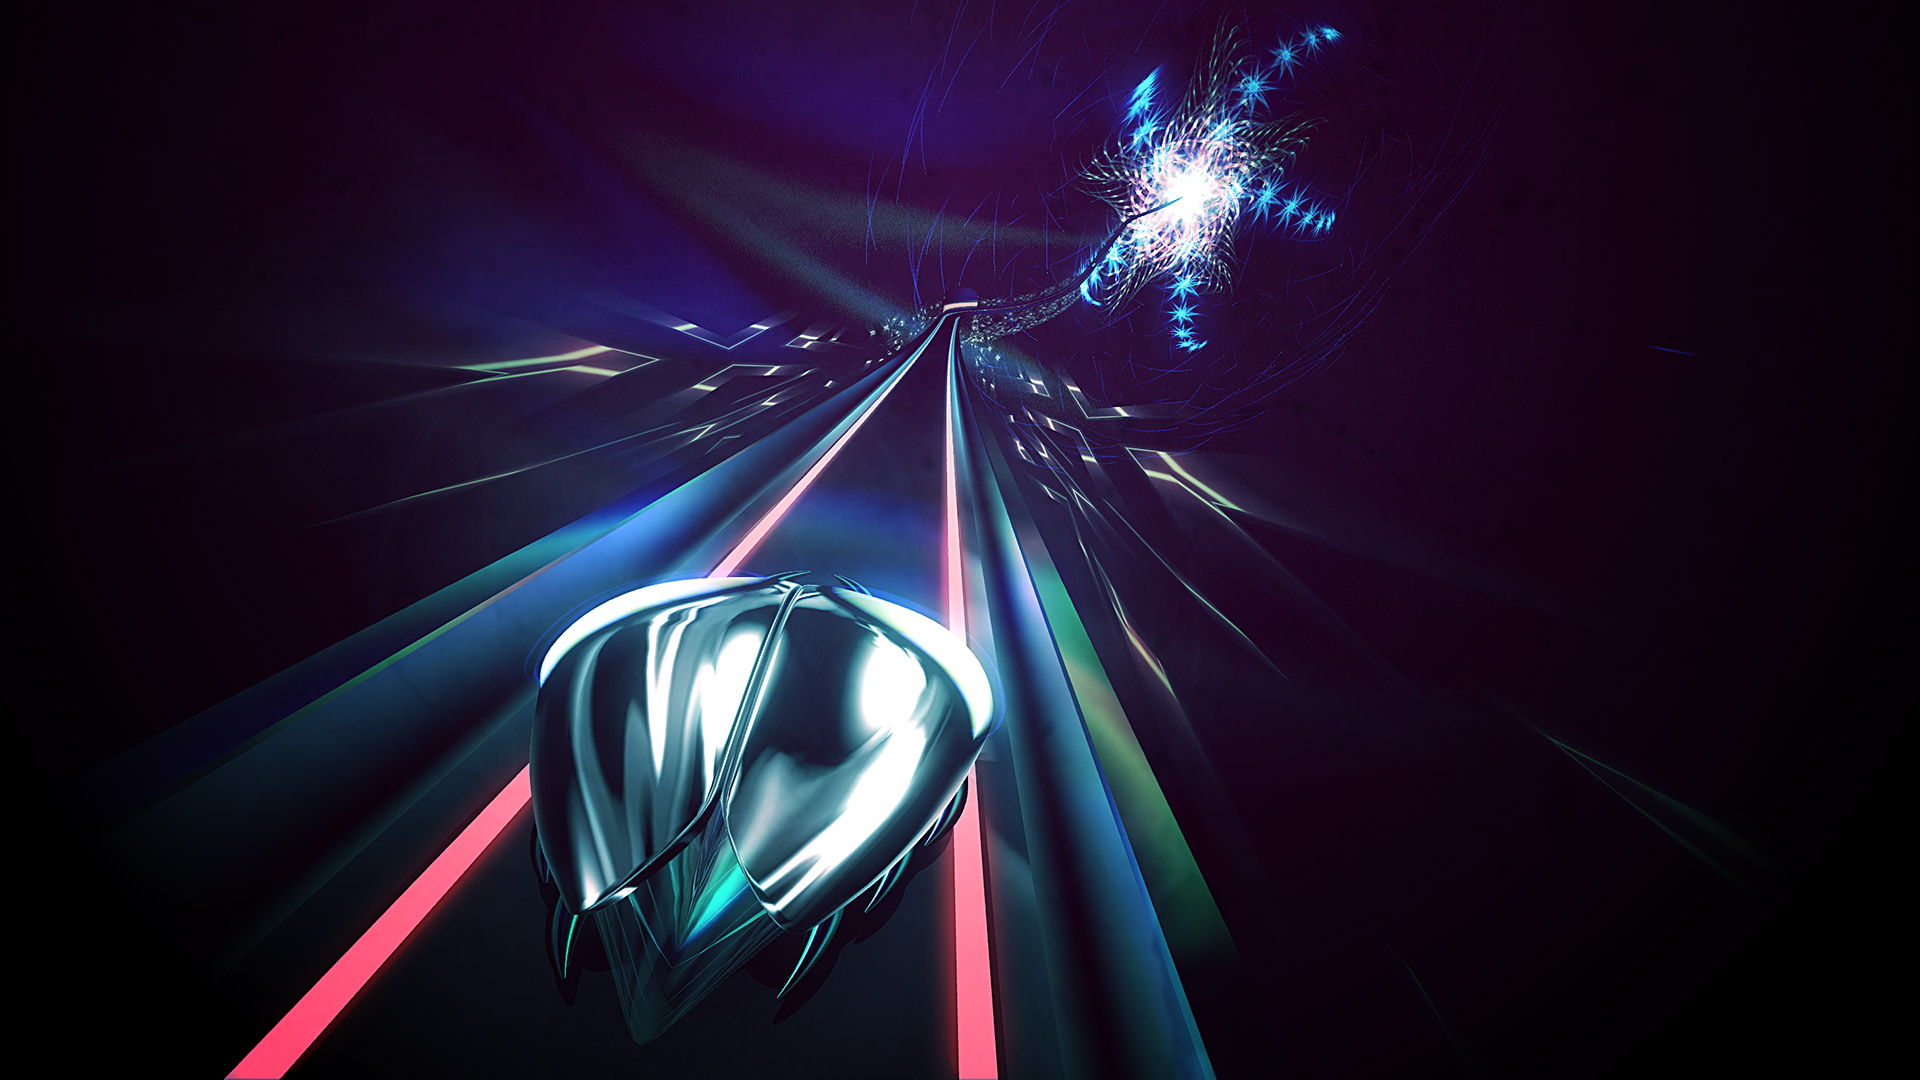 Thumper Free Download